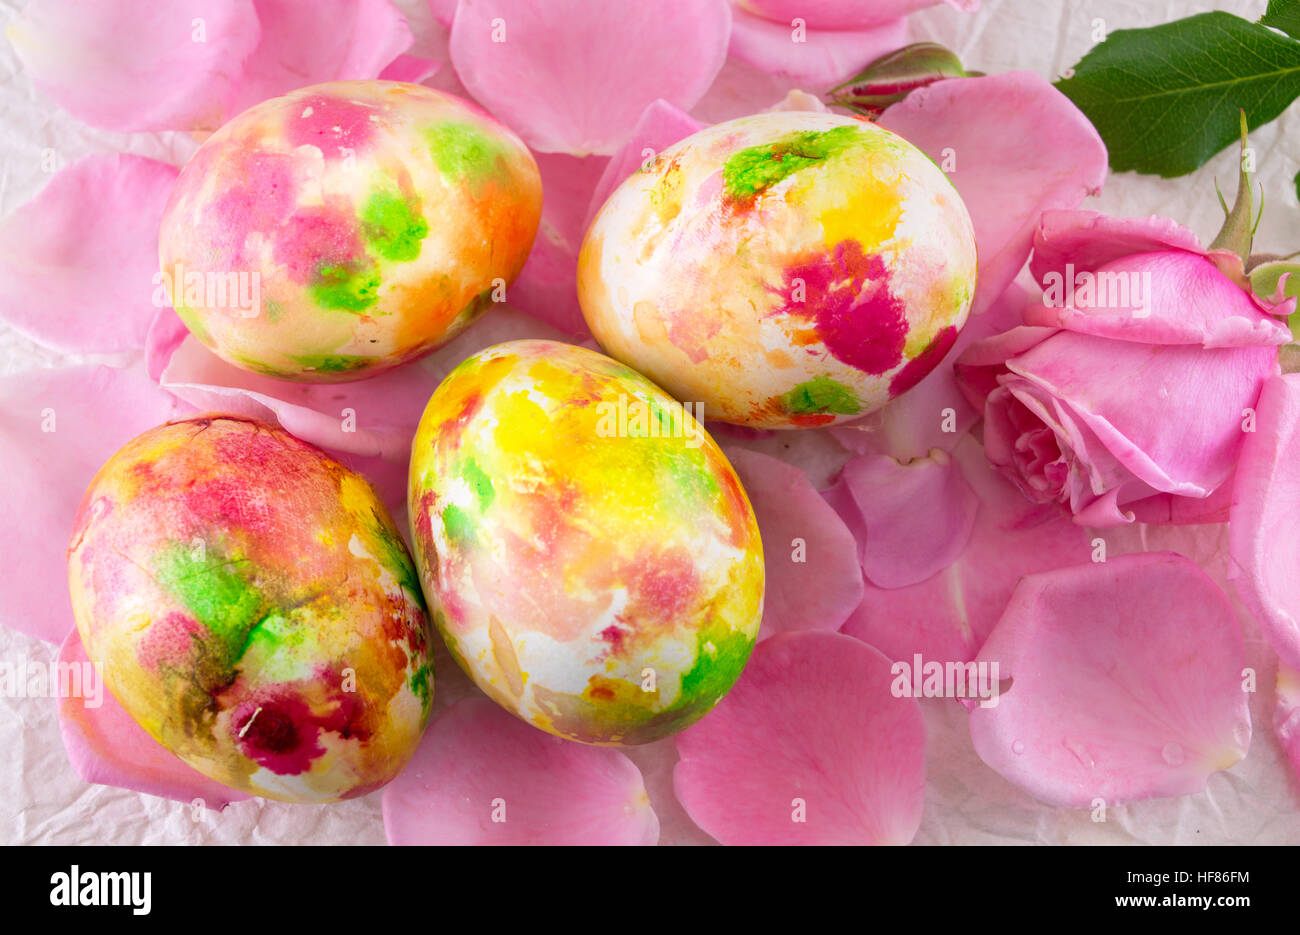 Painted Easter egg placed on pink rose petals Stock Photo